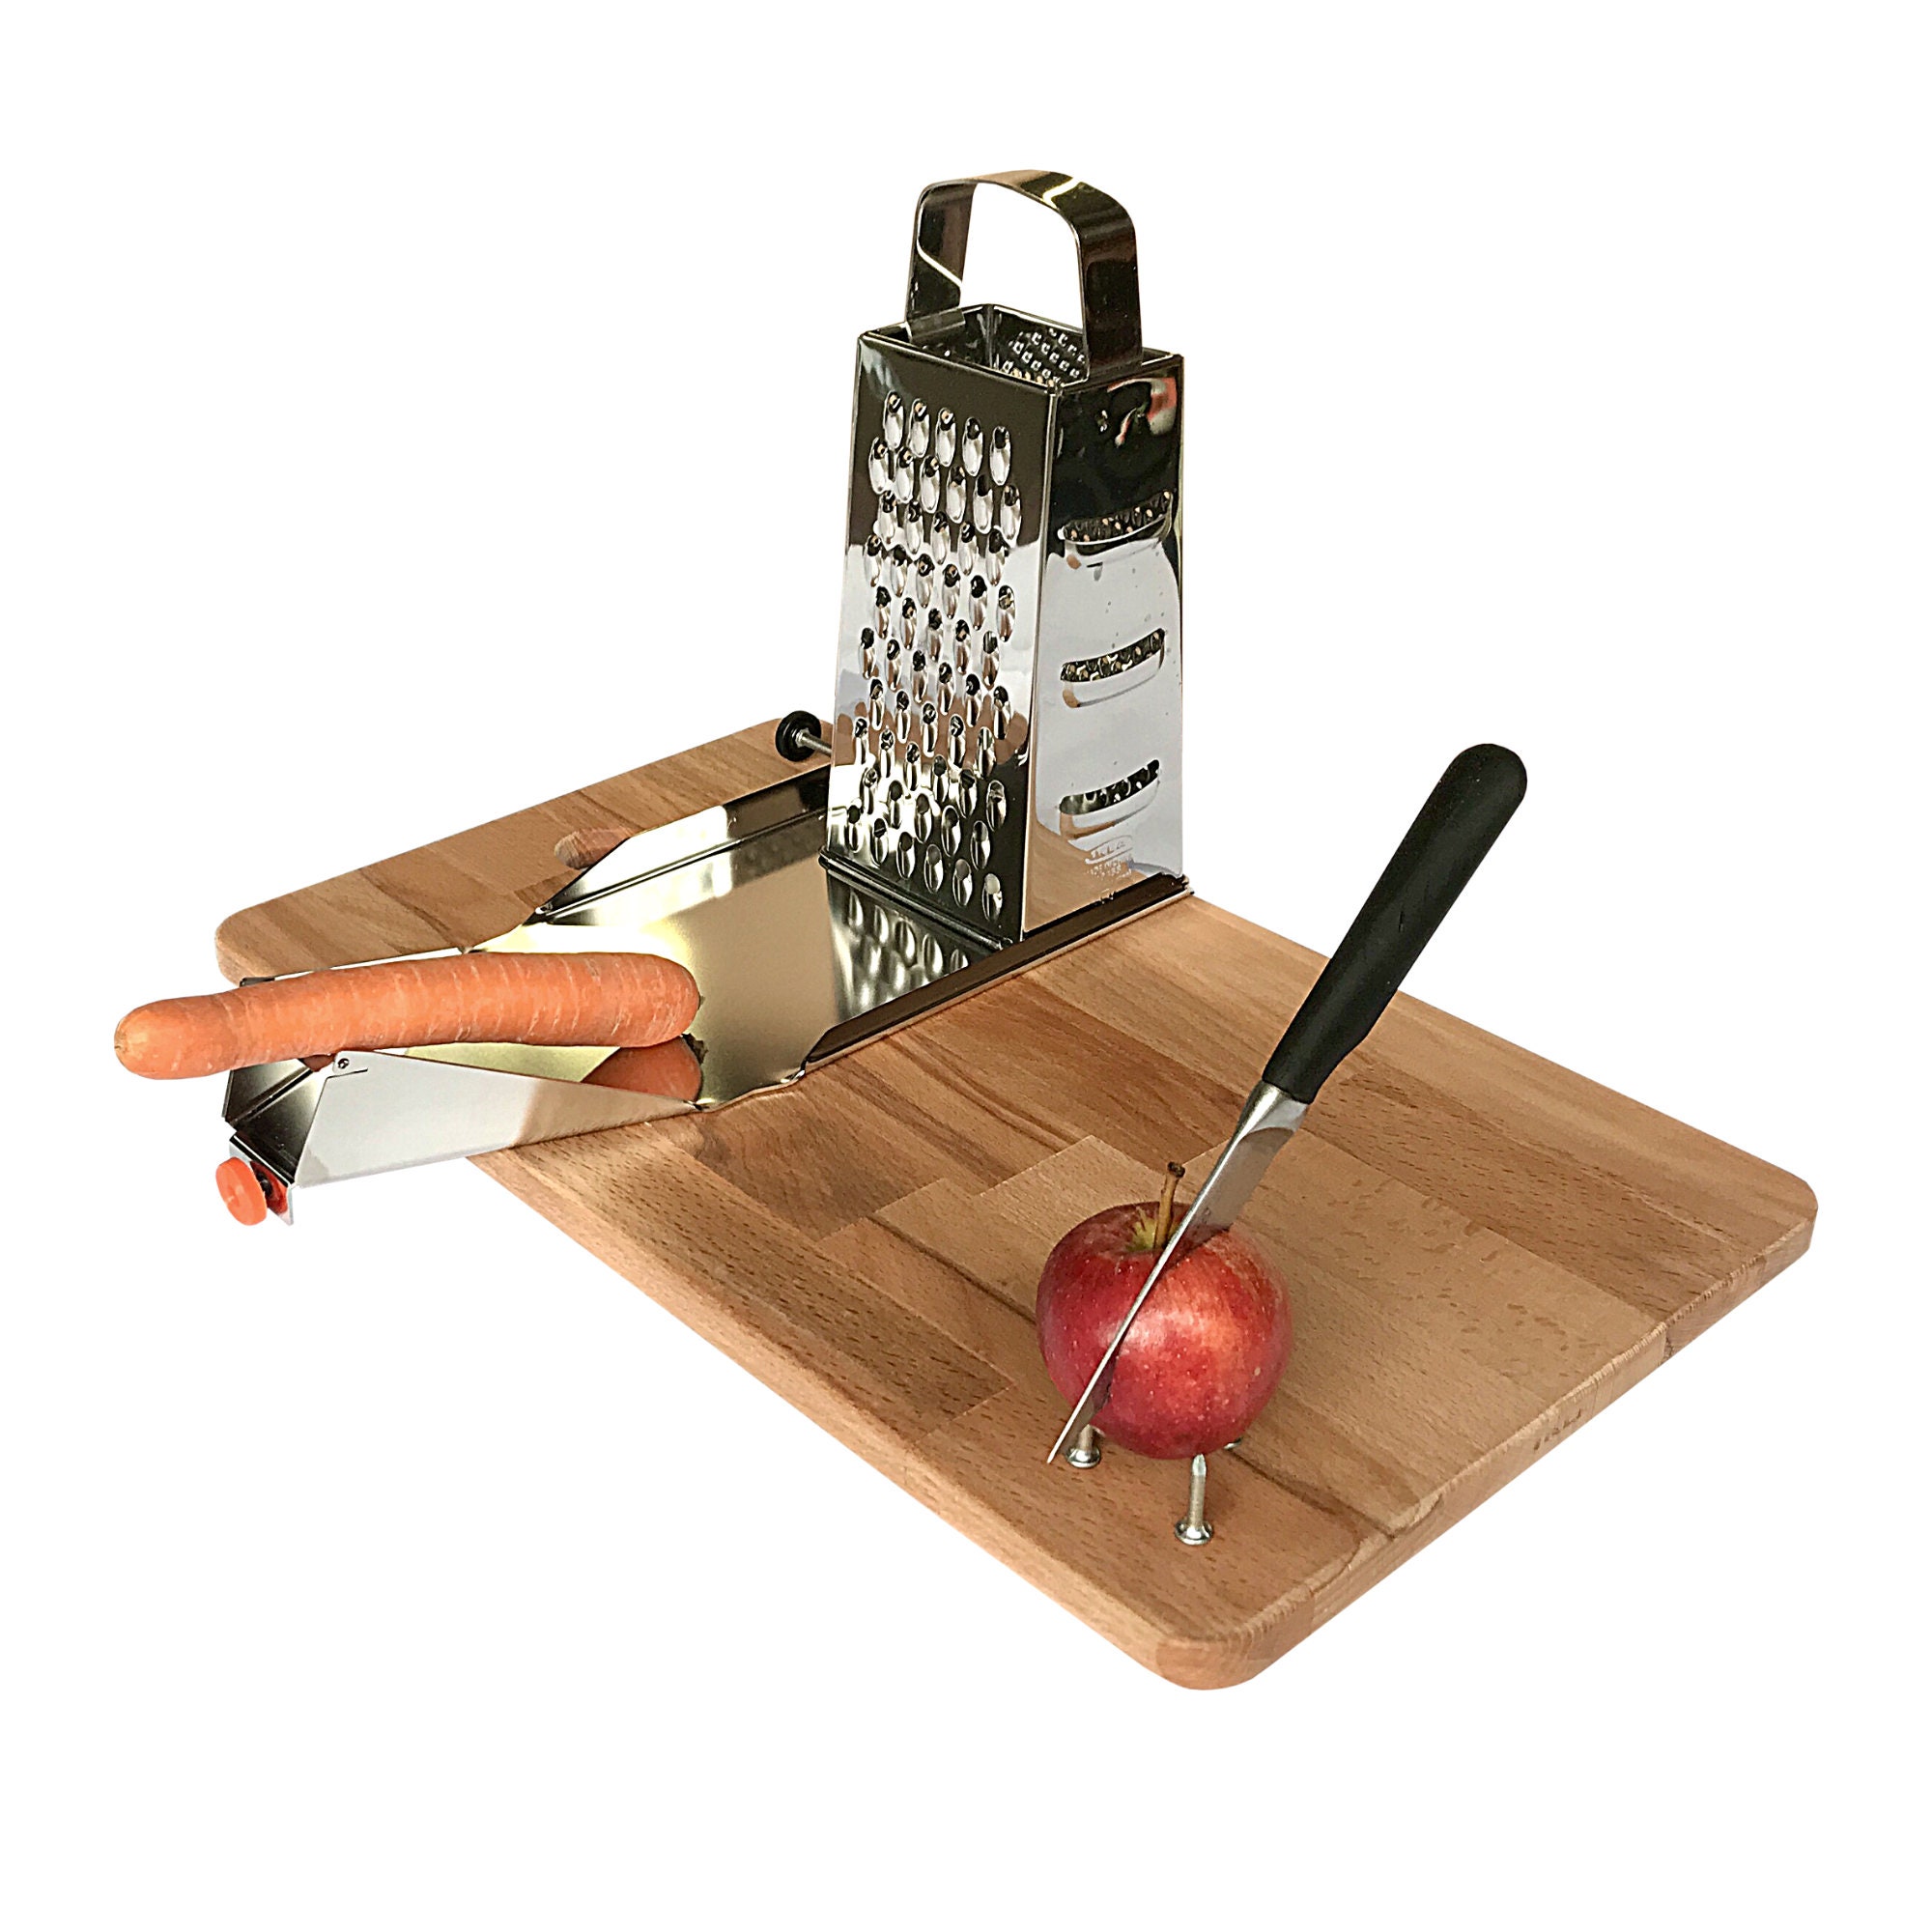 Assistive Cutting Board for One Hand Use for Disabled, Elderly or